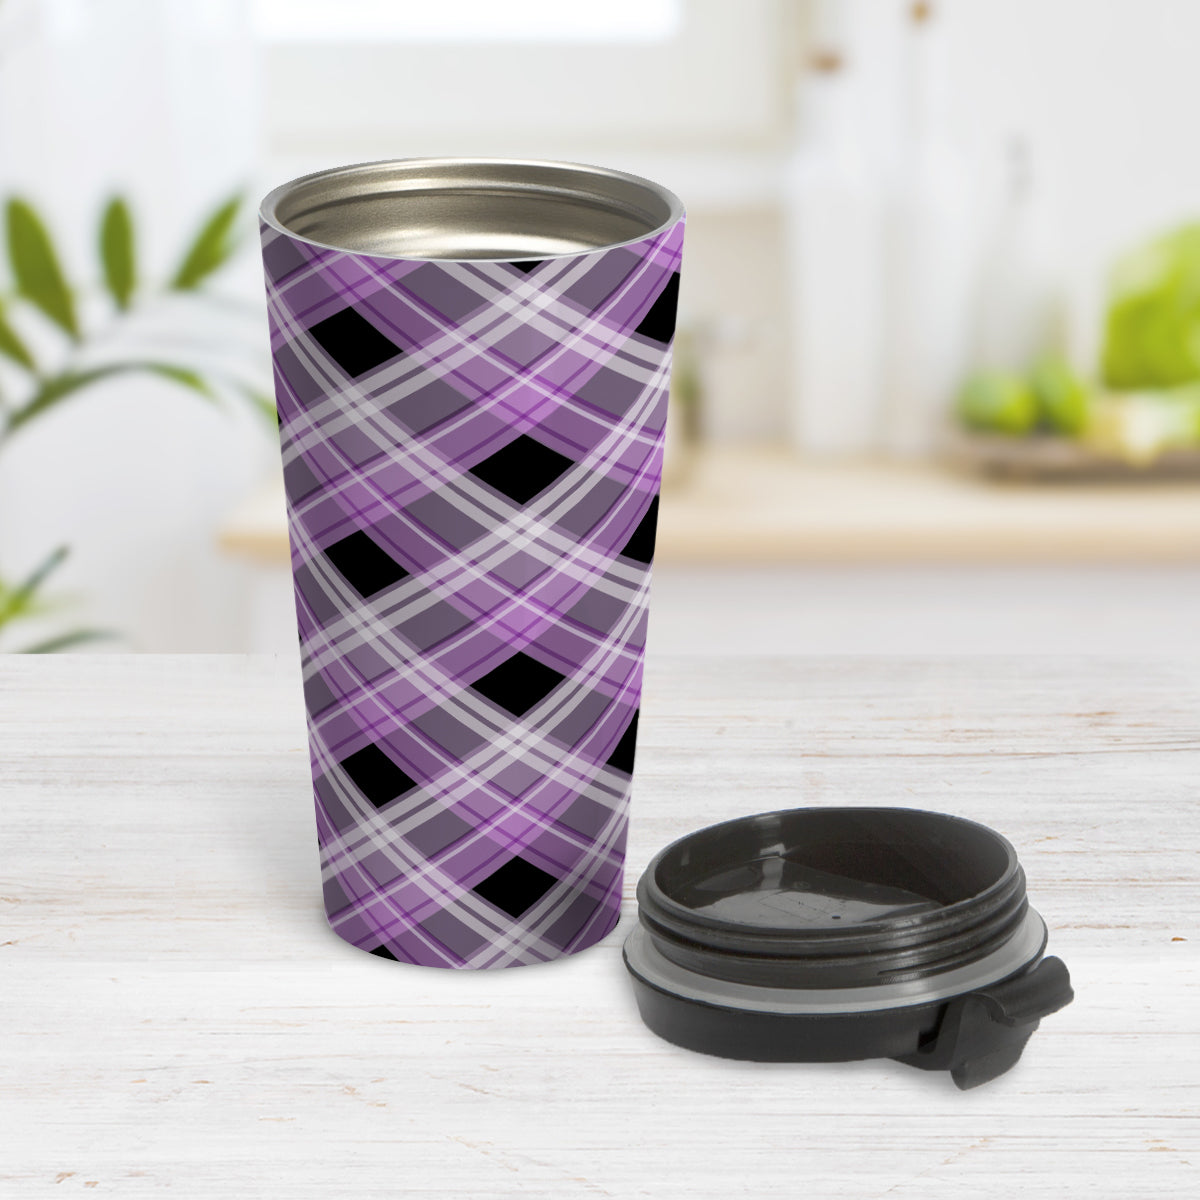 Alternative Purple Plaid Travel Mug (15oz) at Amy's Coffee Mugs. A stainless steel travel mug designed with a diagonal purple, black, and white plaid pattern that wraps around the mug. Designed for someone who likes plaid patterns and loves the color purple. Photo shows the mug open with the lid on the table beside it.